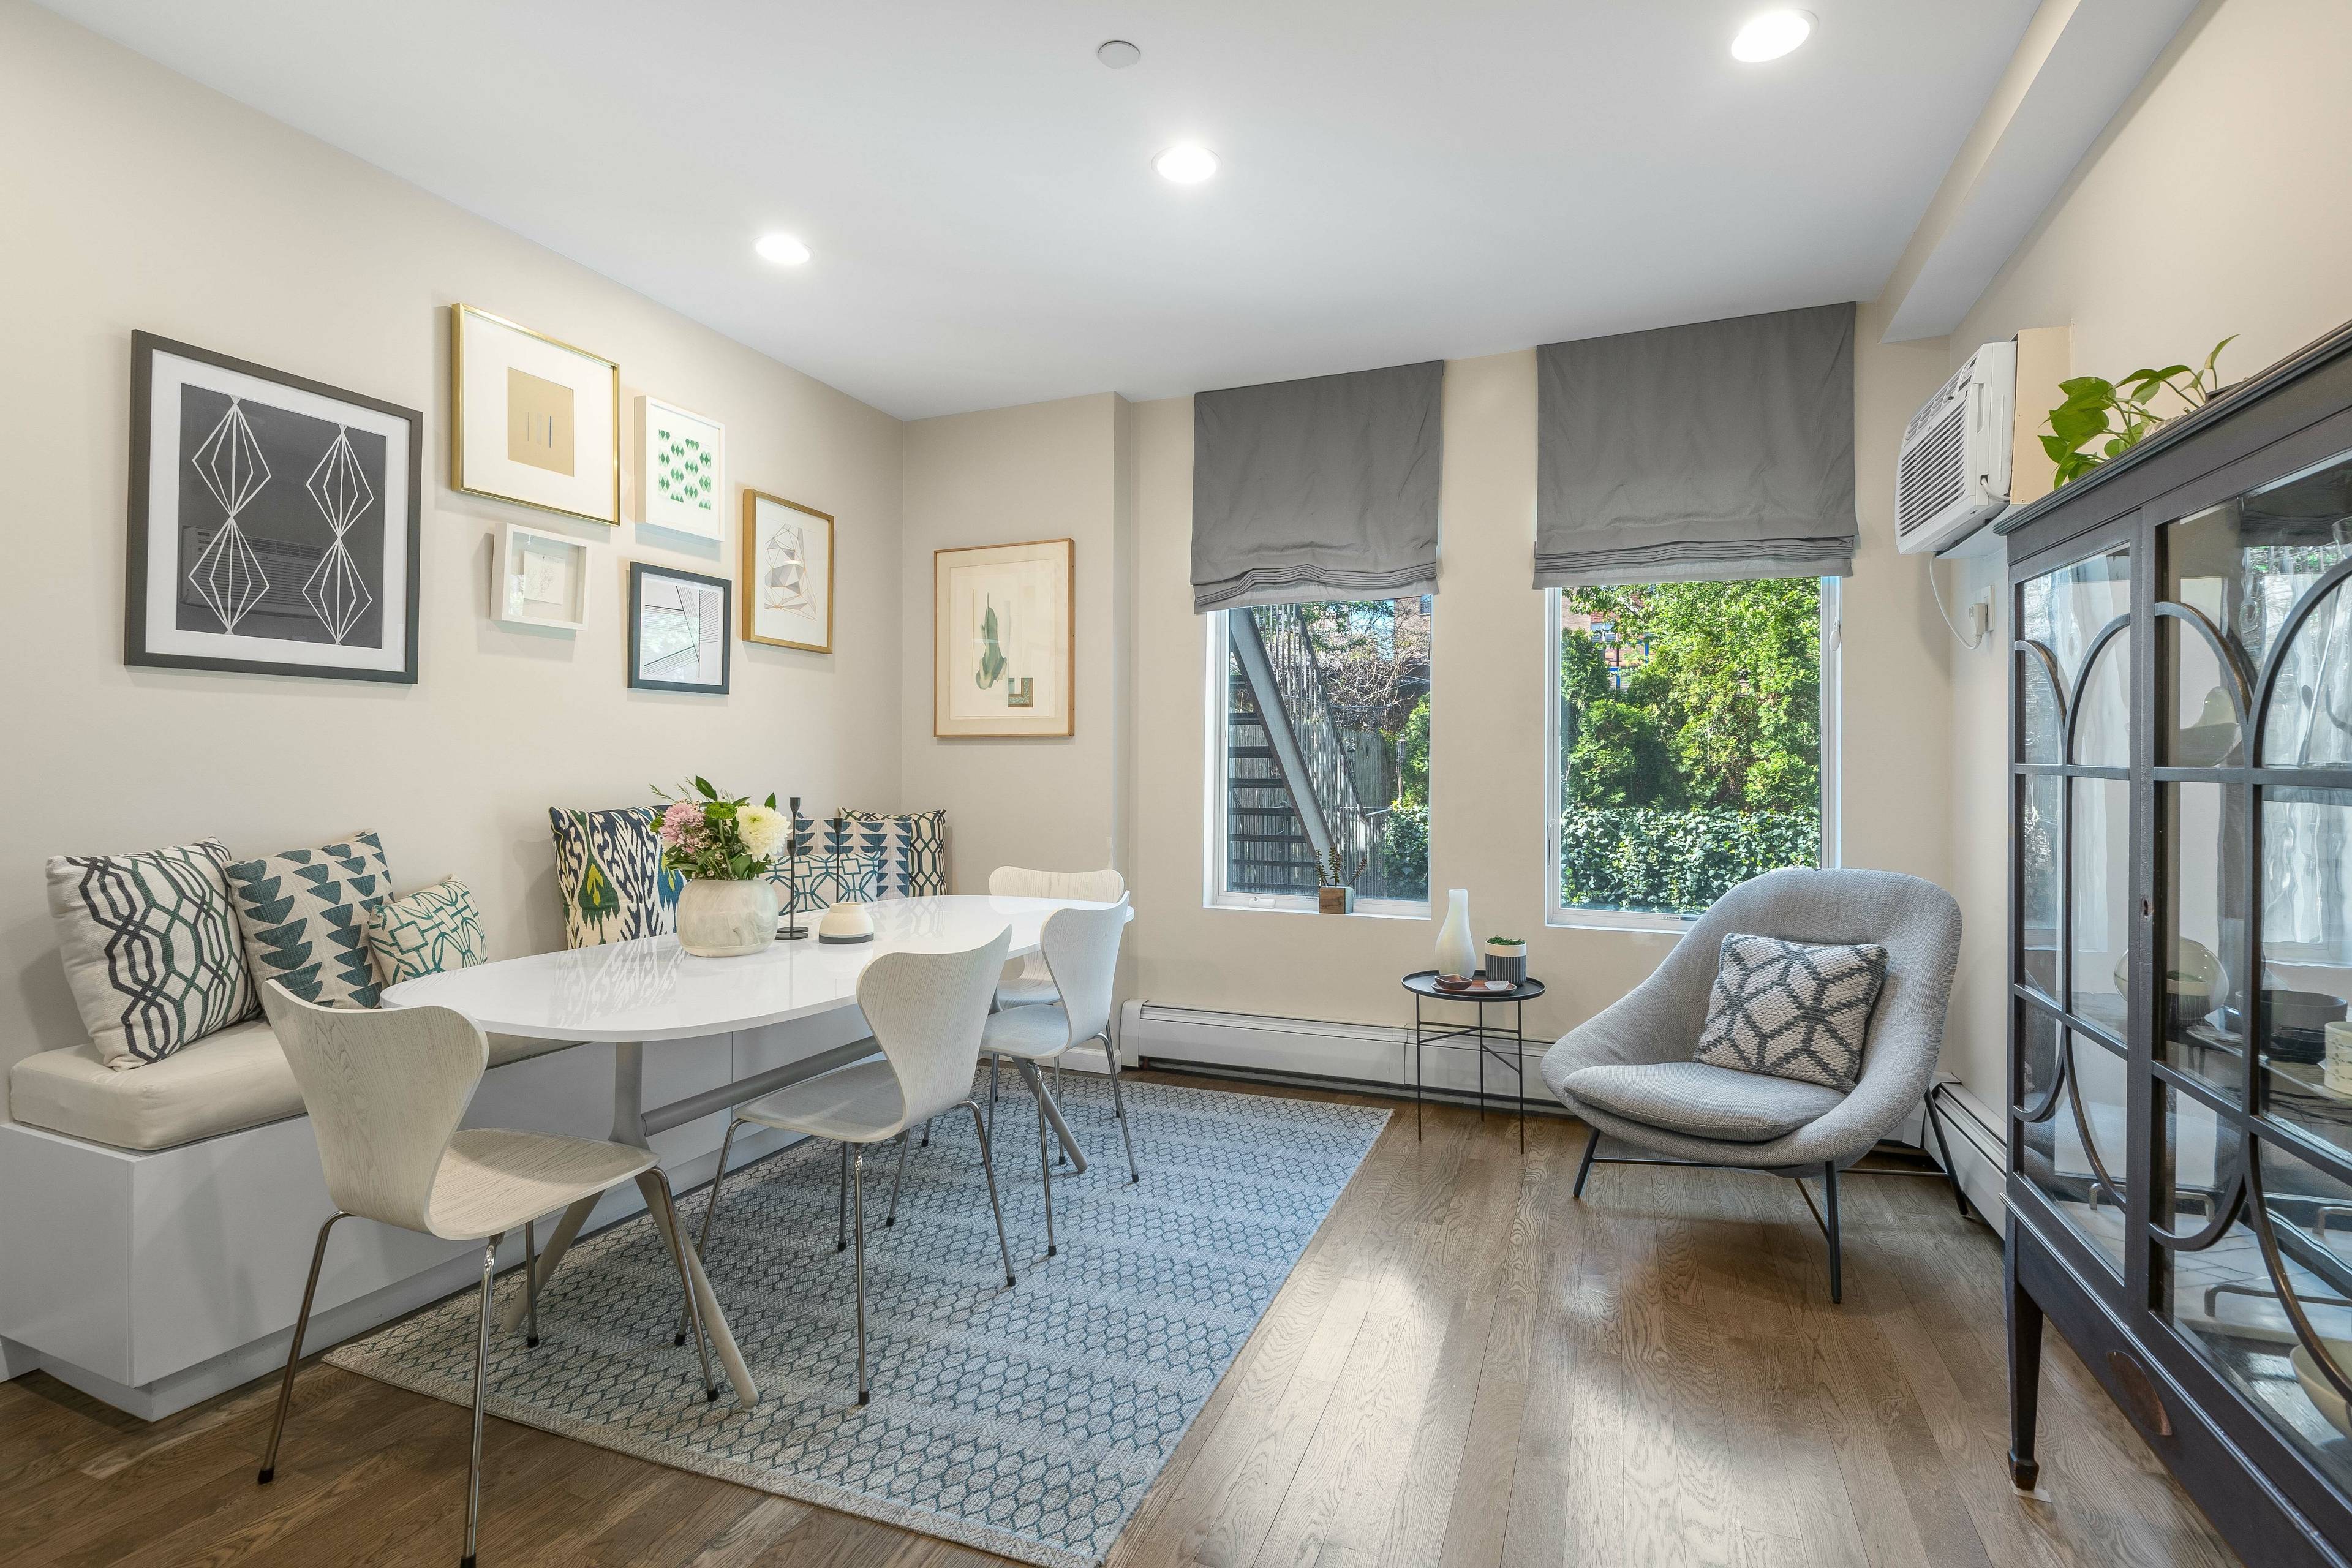 This rarely available picturesque Park Slope two bedroom 1, 166 SF duplex condominium with a serene 400 SF private south facing patio and garden has been meticulously maintained and improved ...